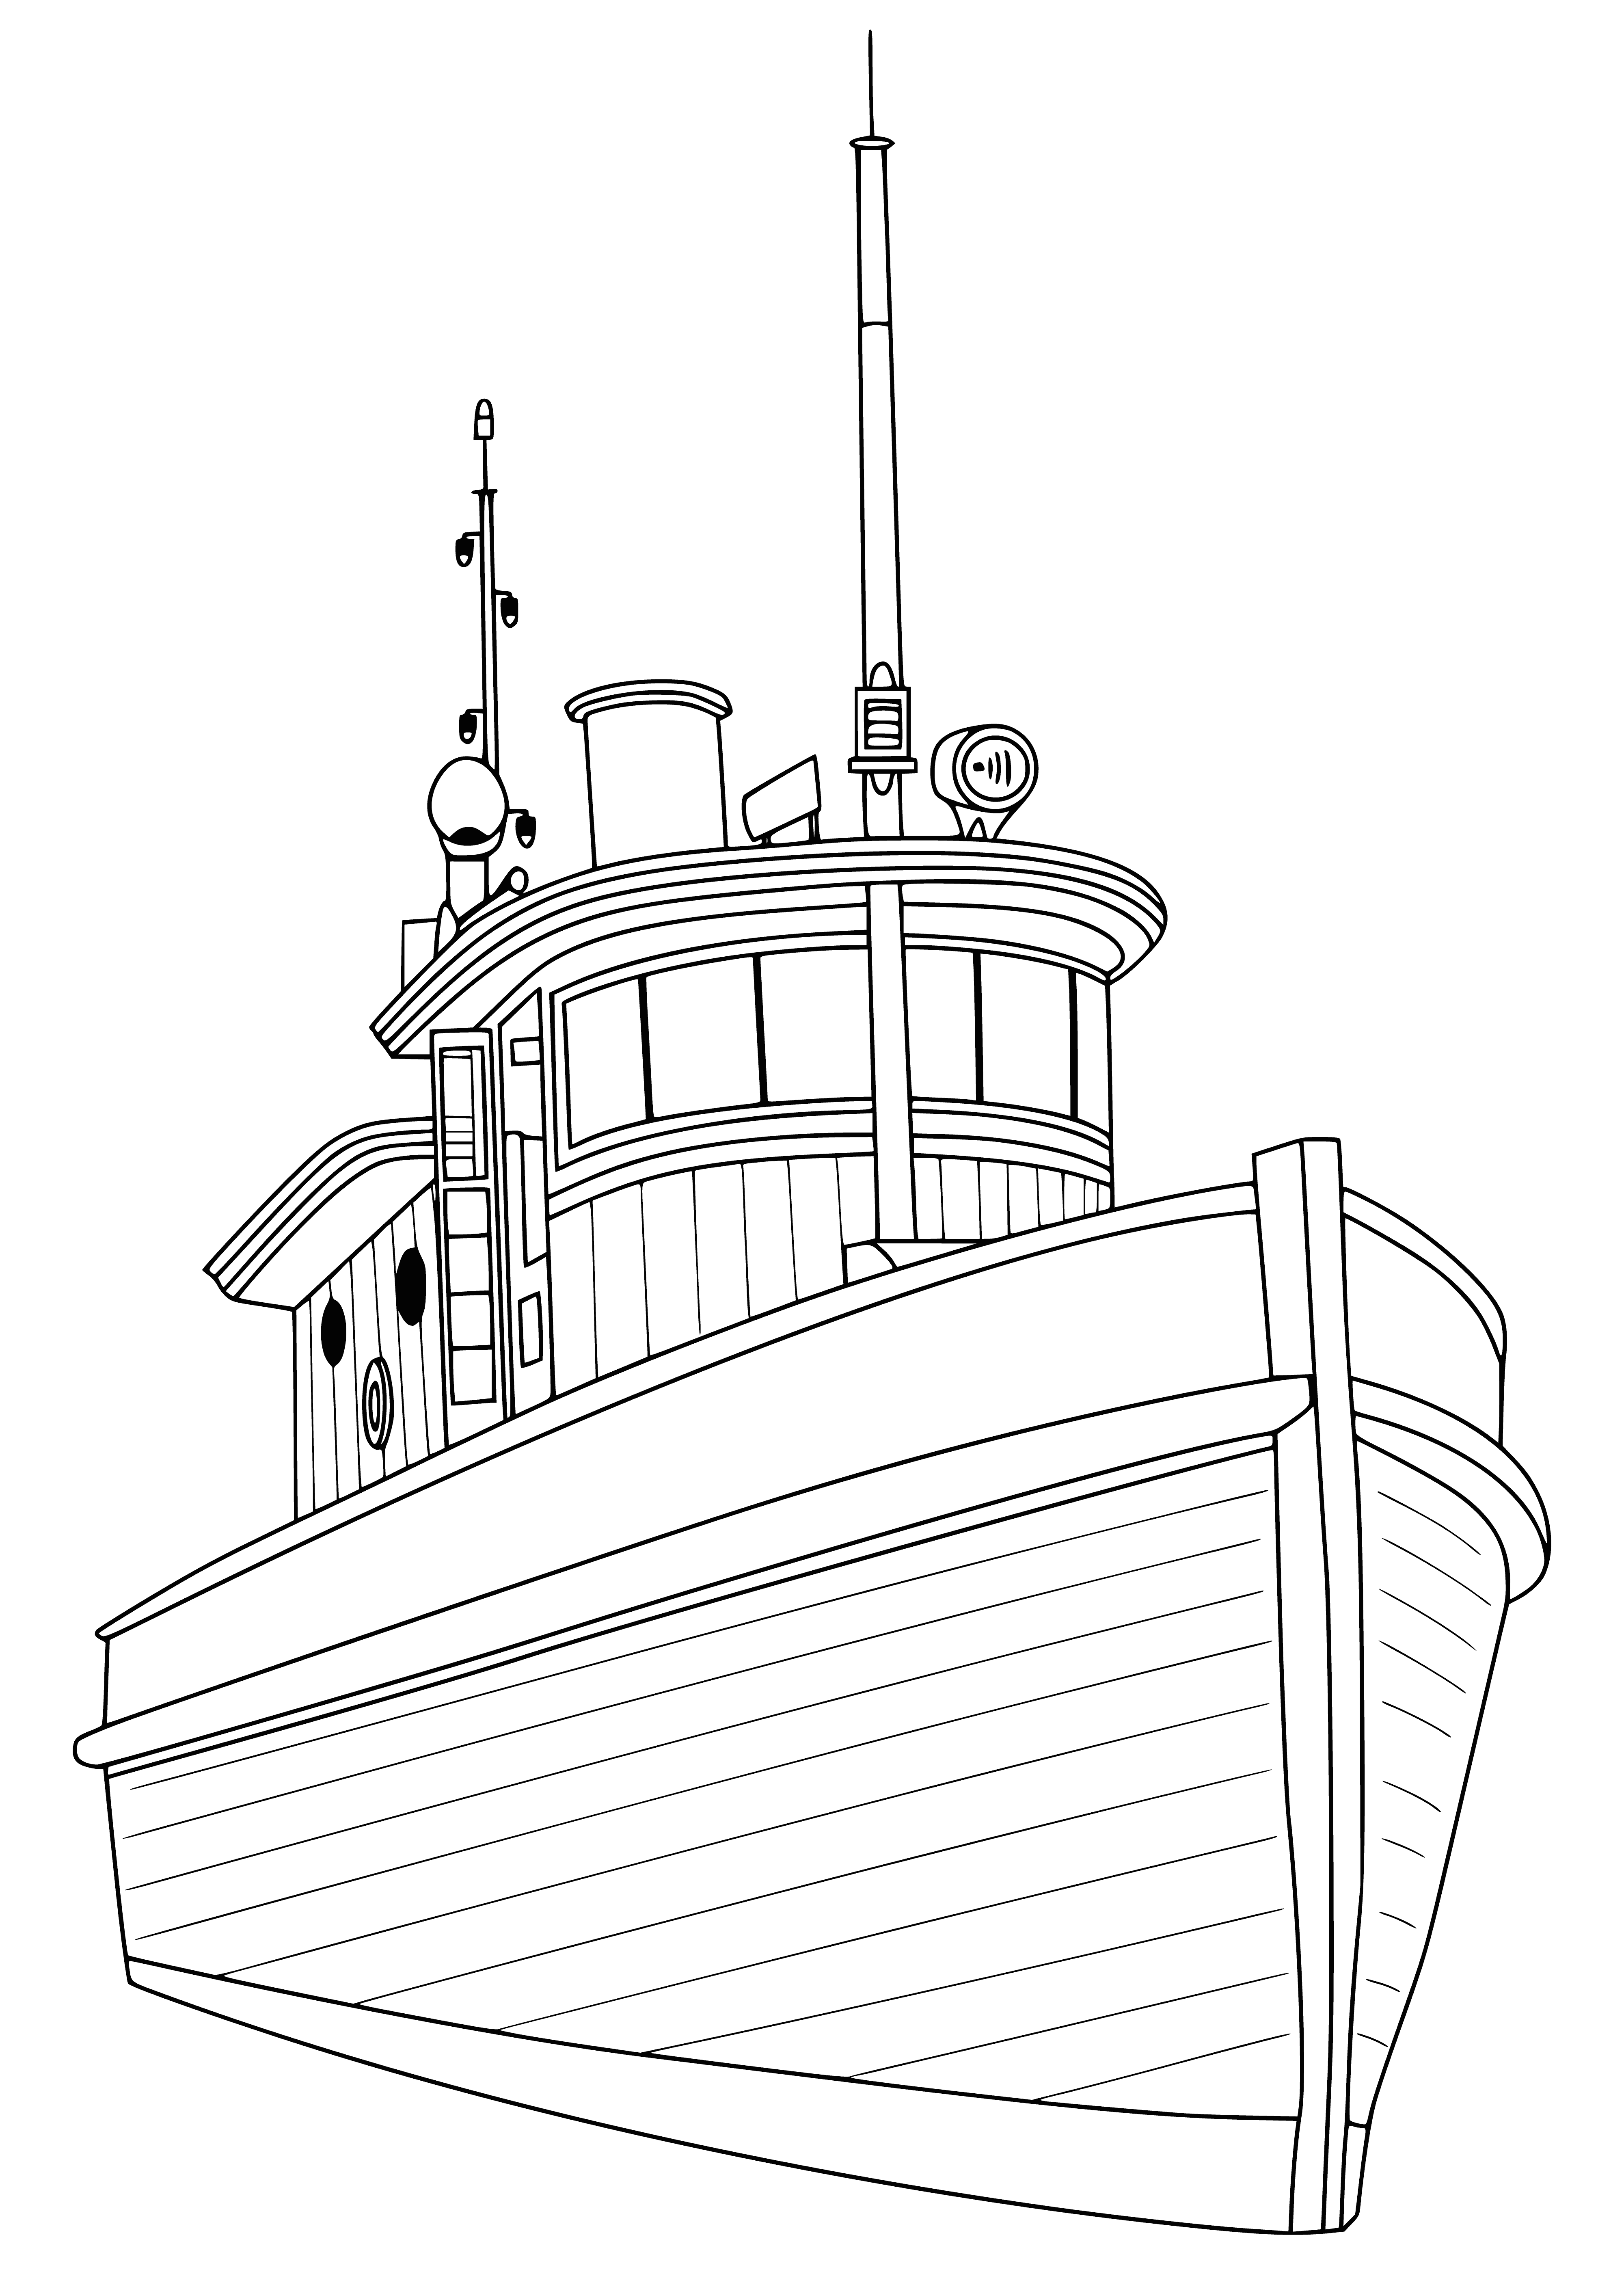 coloring page: A large, white boat with many levels, compartments and a large mast with sails. Designed for living and travelling on the sea.